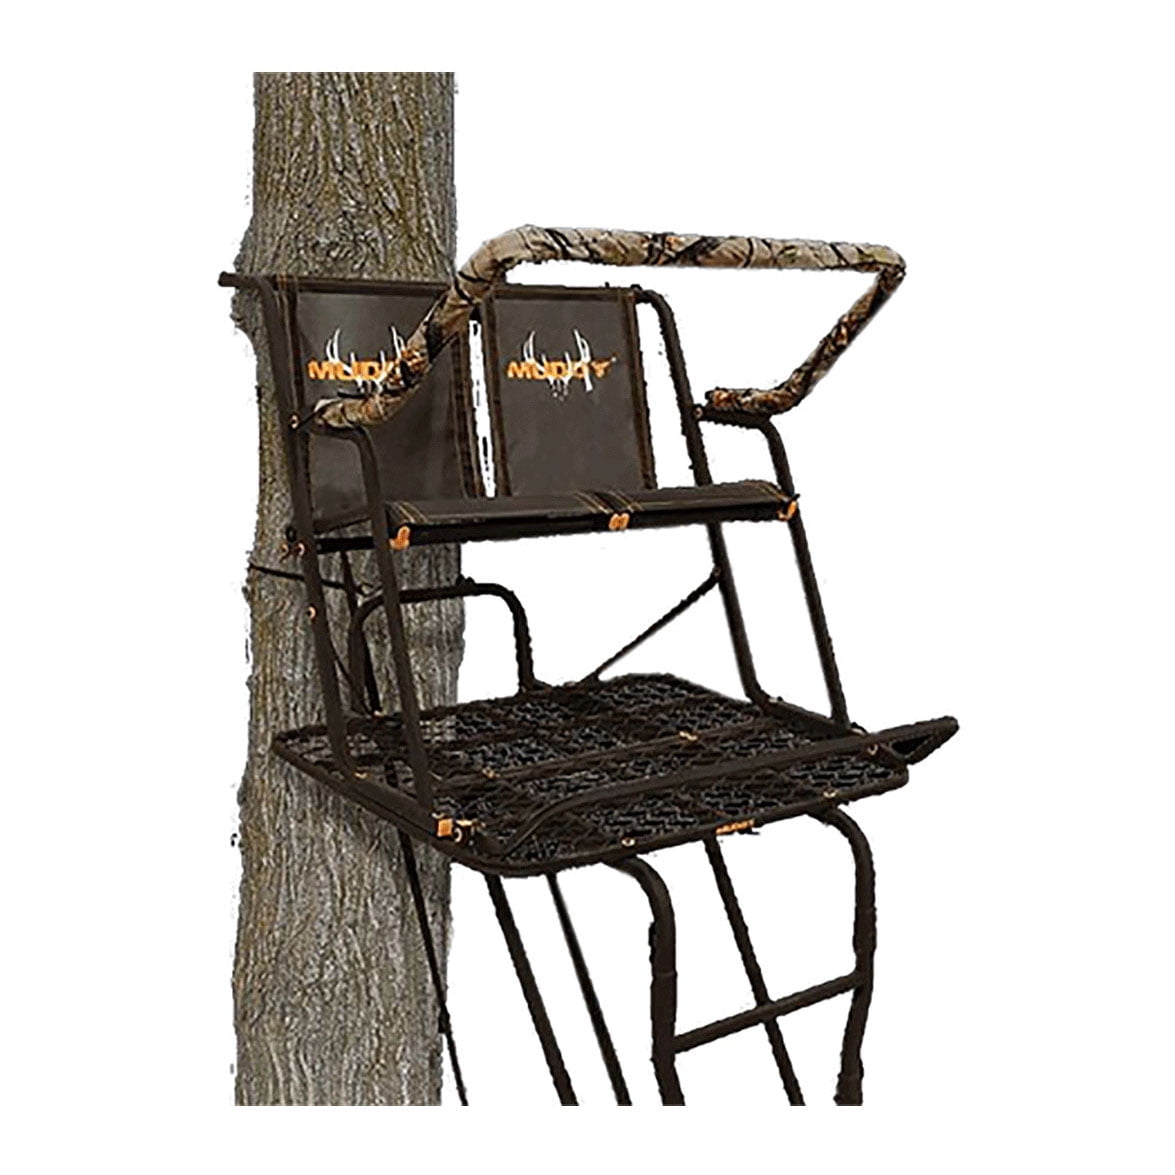 Muddy MLS2300 Partner 17' Outdoor 2 Person Hunting Ladder Tree Stand (2 Pack)